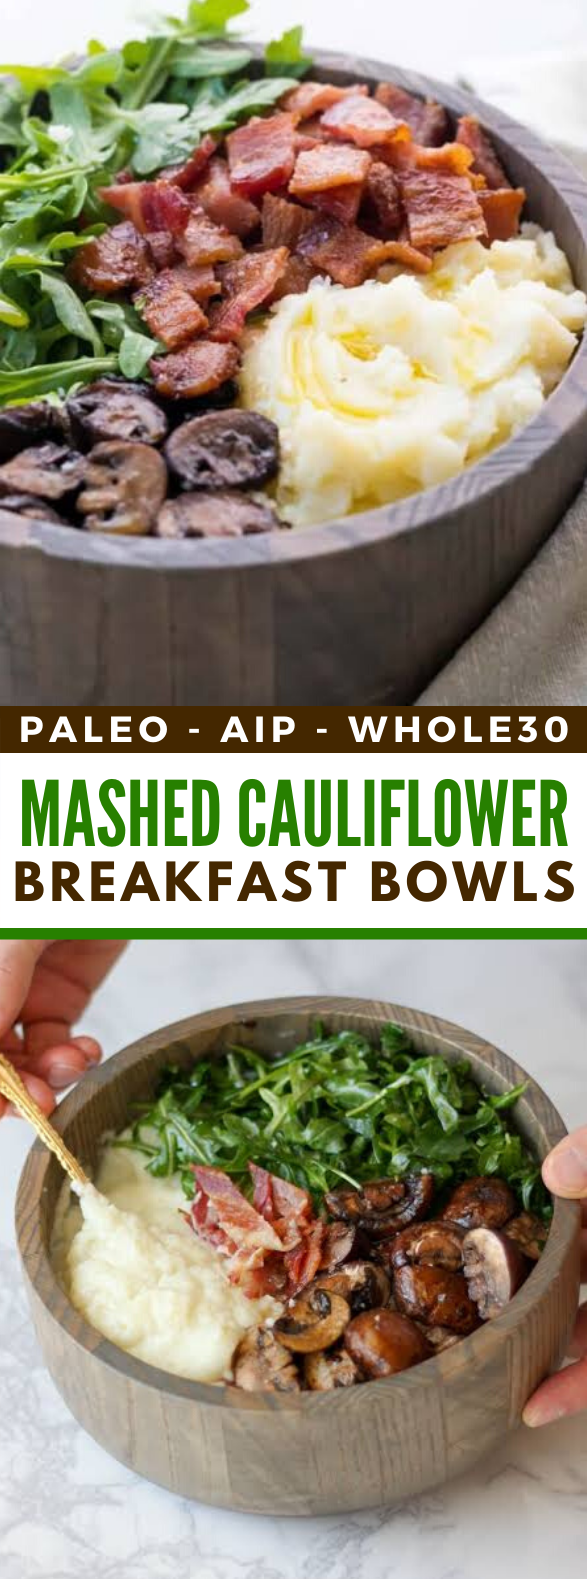 Mashed Cauliflower Breakfast Bowls (Whole30, AIP) #diet #lowcarb